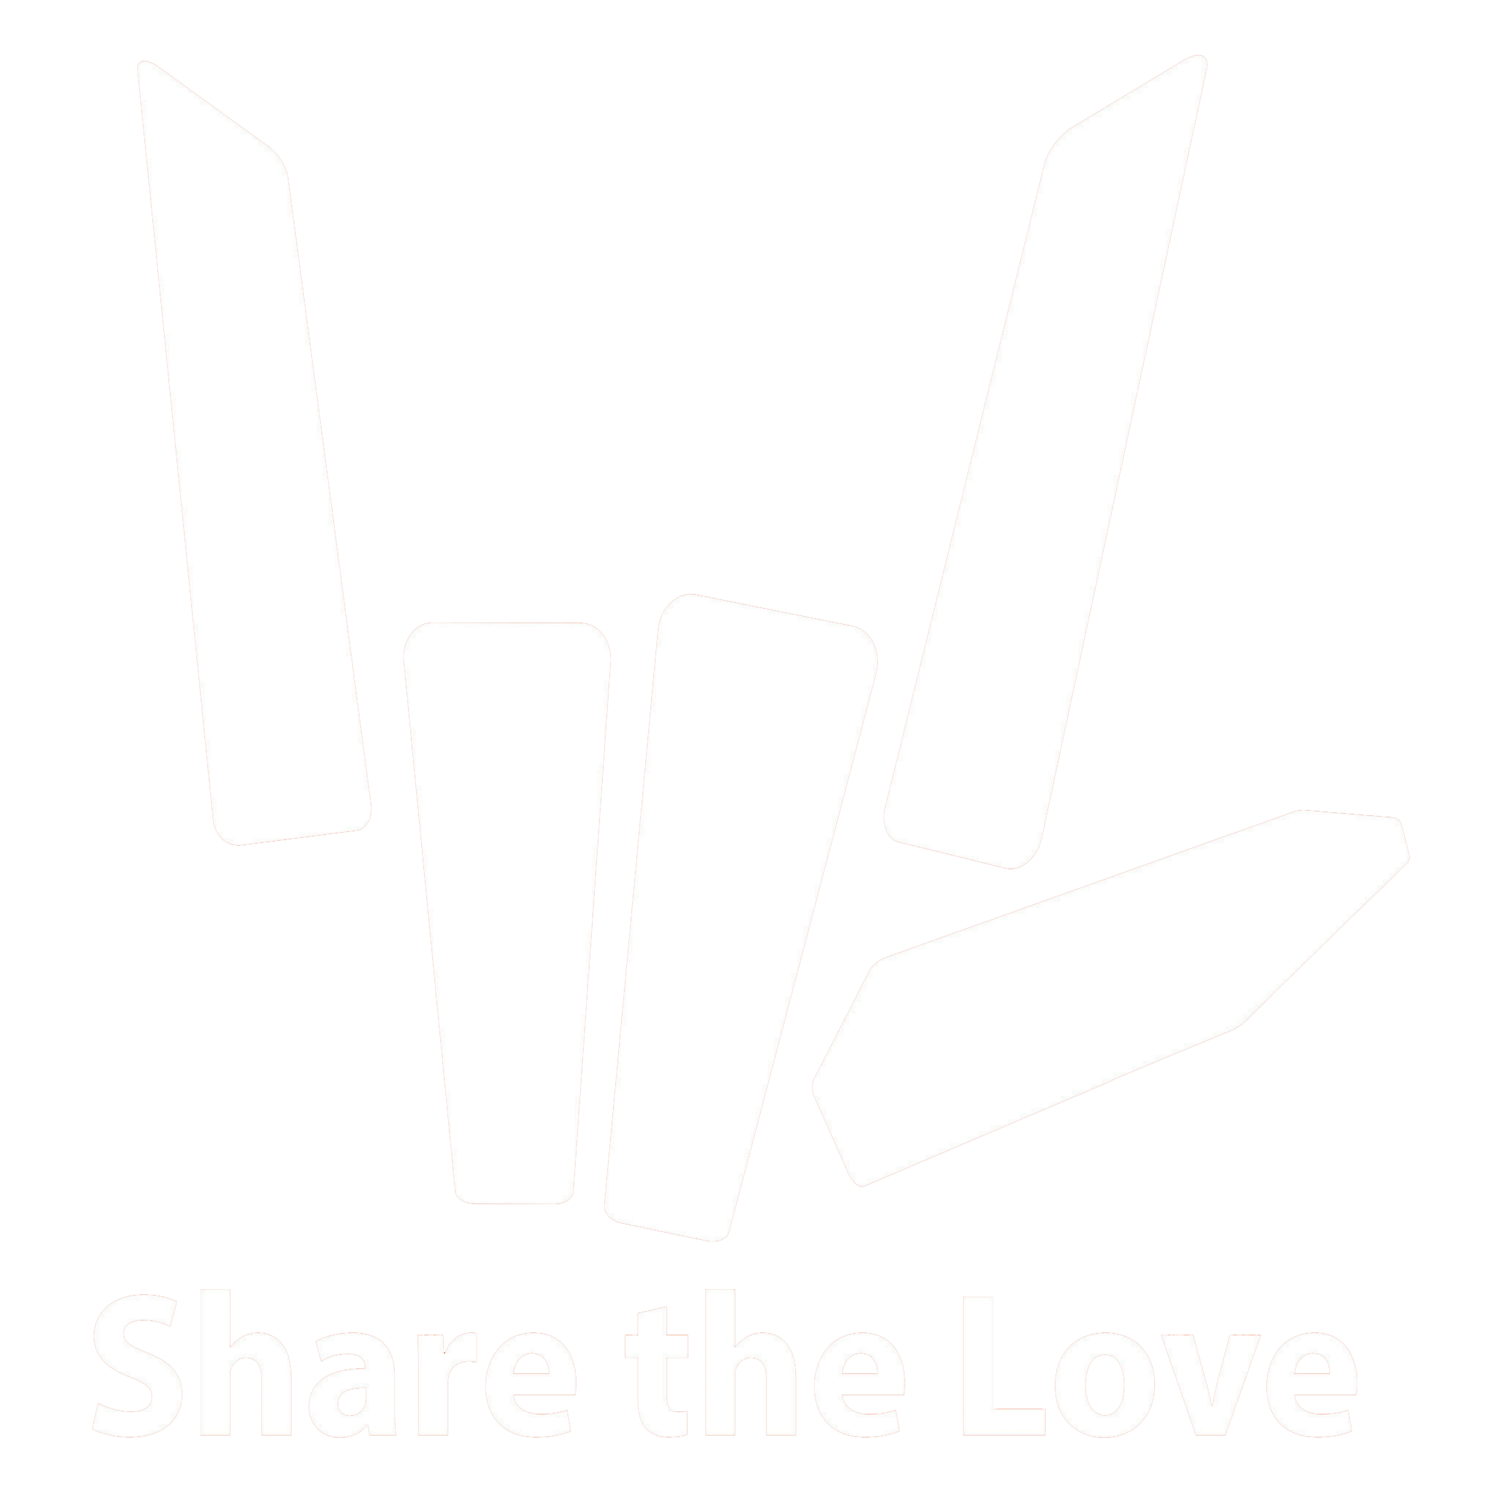 Download Share the love Logos